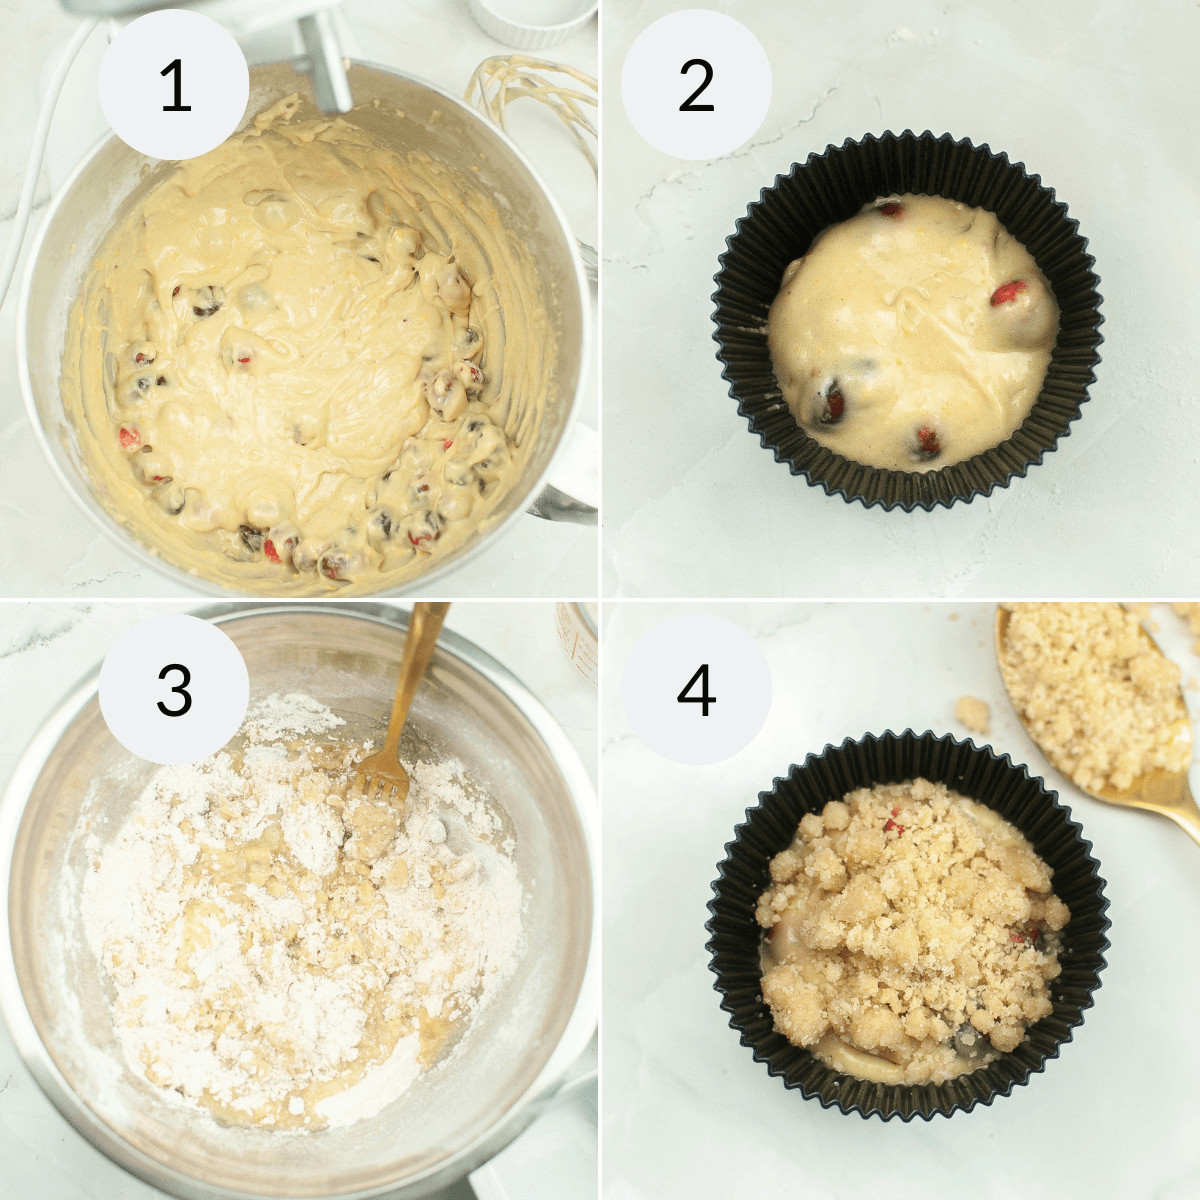 Adding the wet ingredients and filling the cups with the batter and topping with the streusel. 